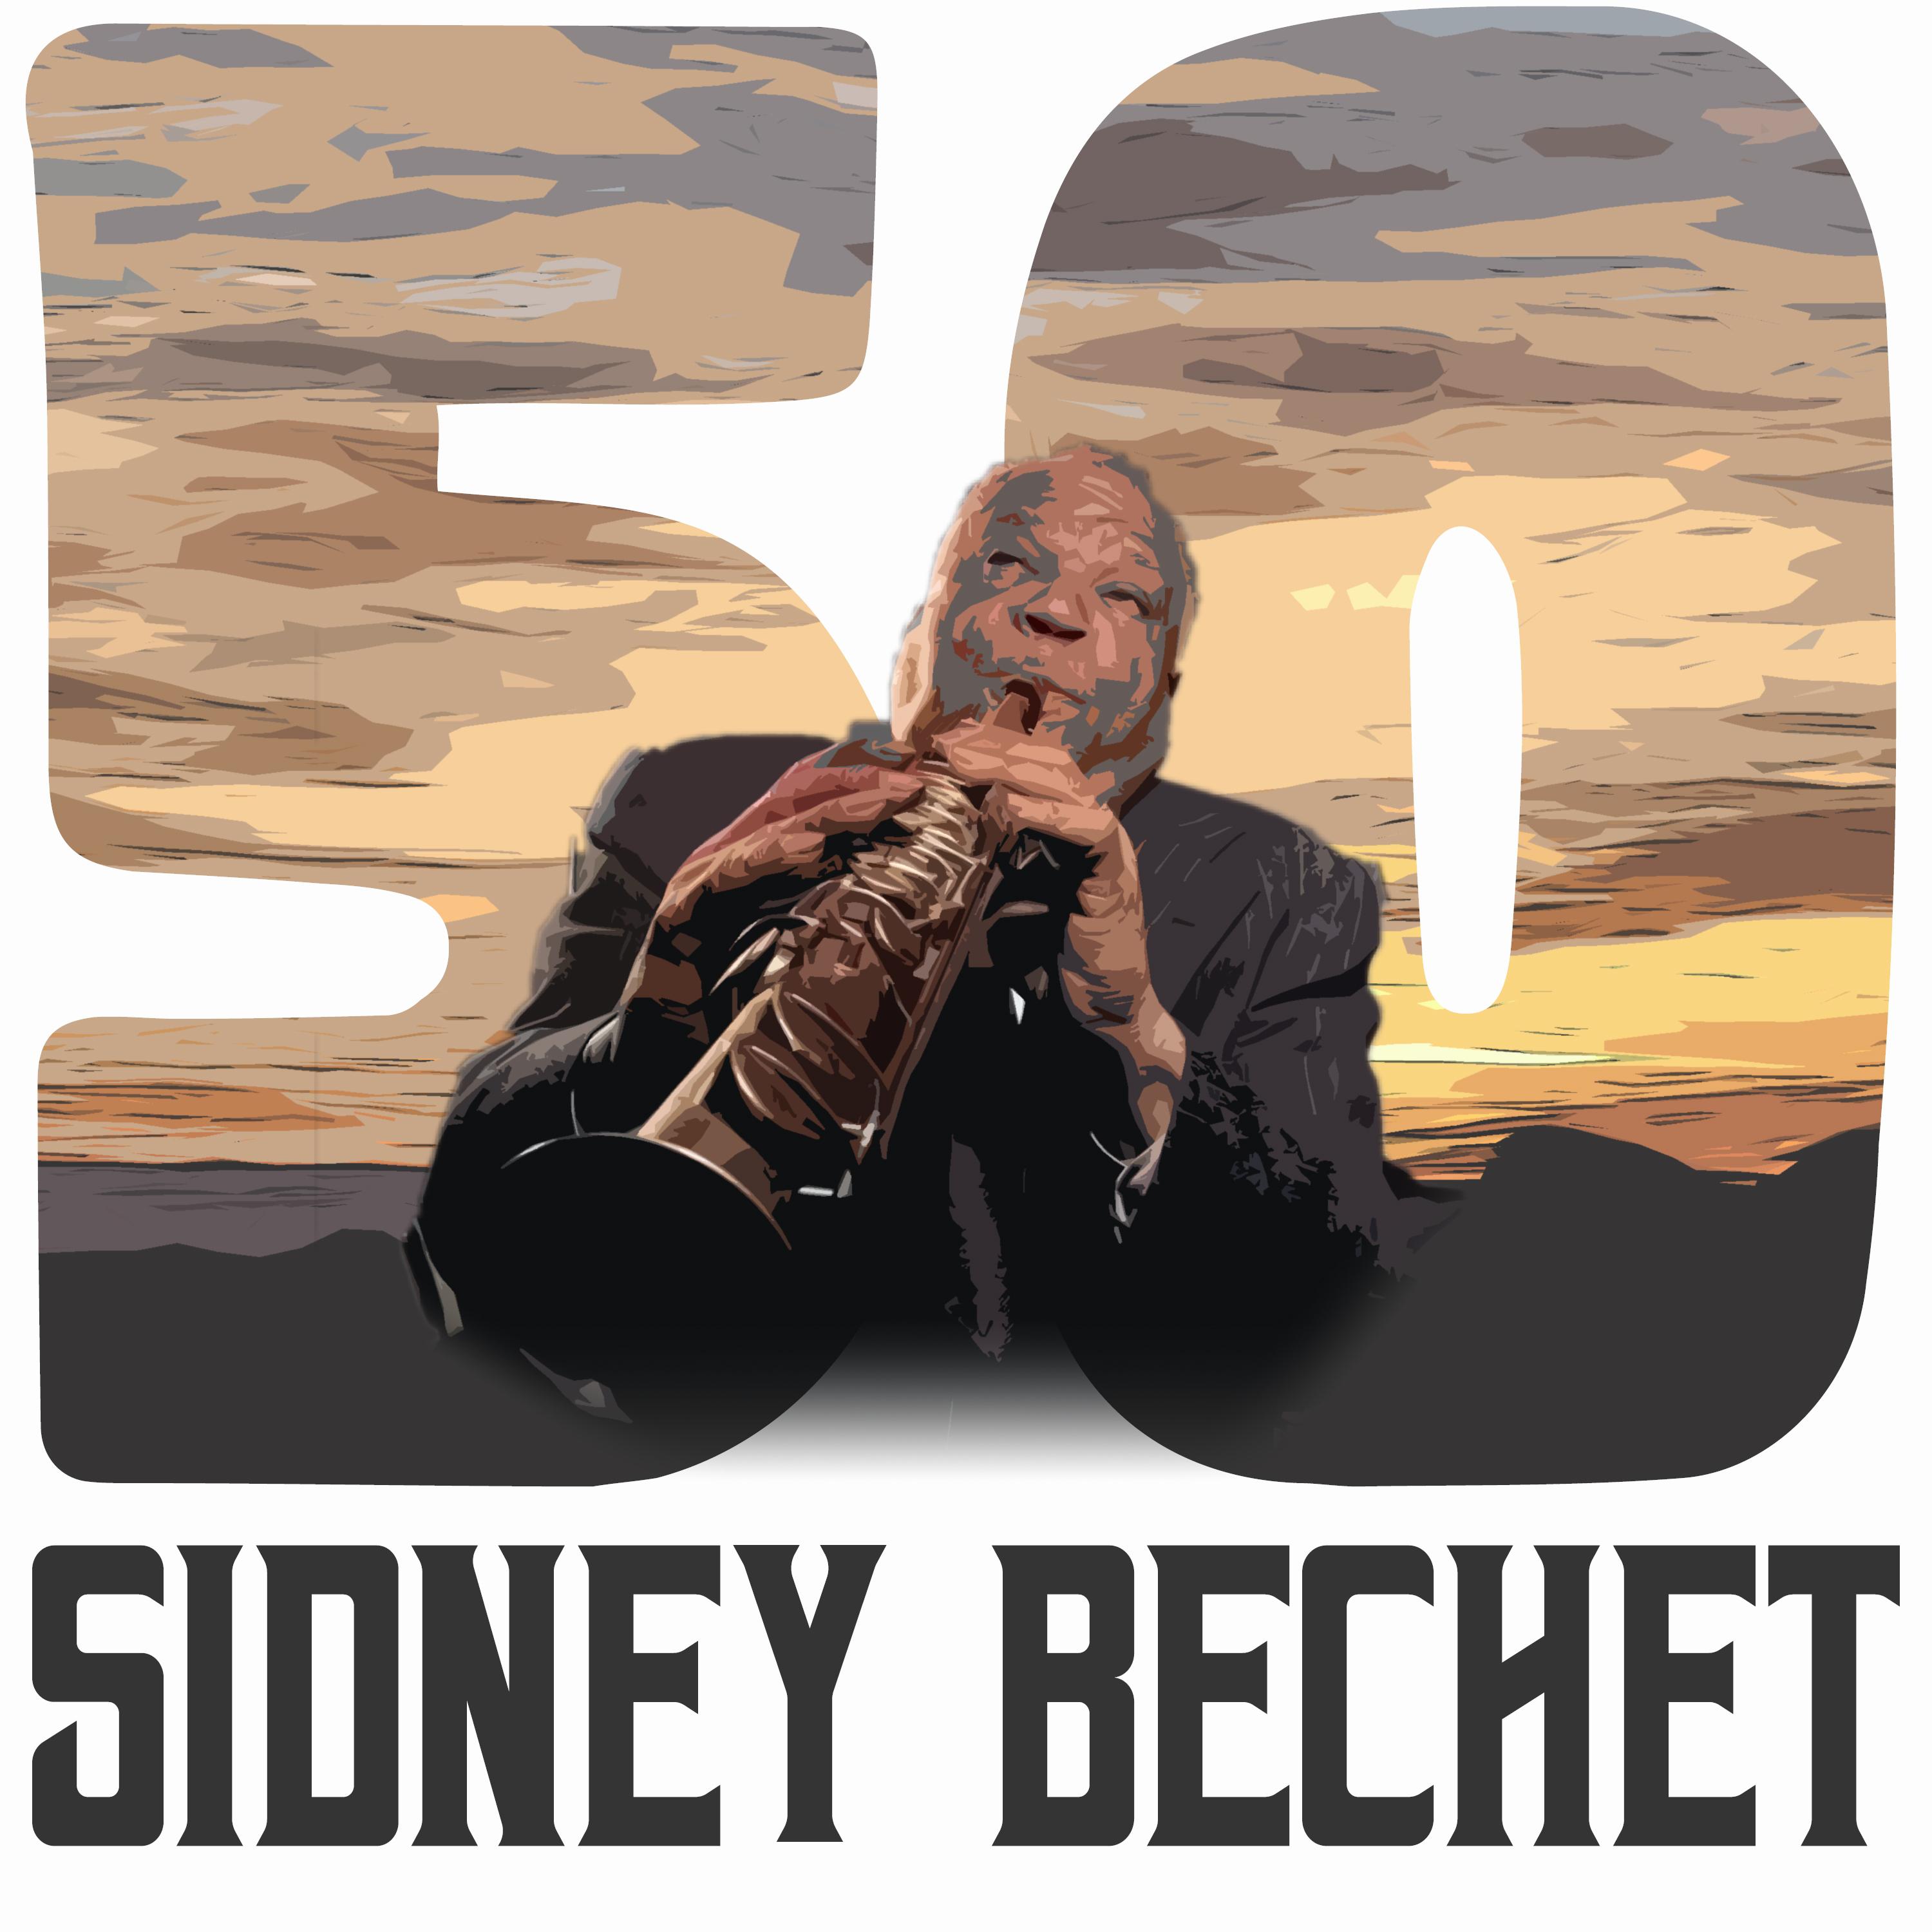 Sidney Bechet and the New Orleans Feetwarmers - Coal Black Shine (Remastered 2014)